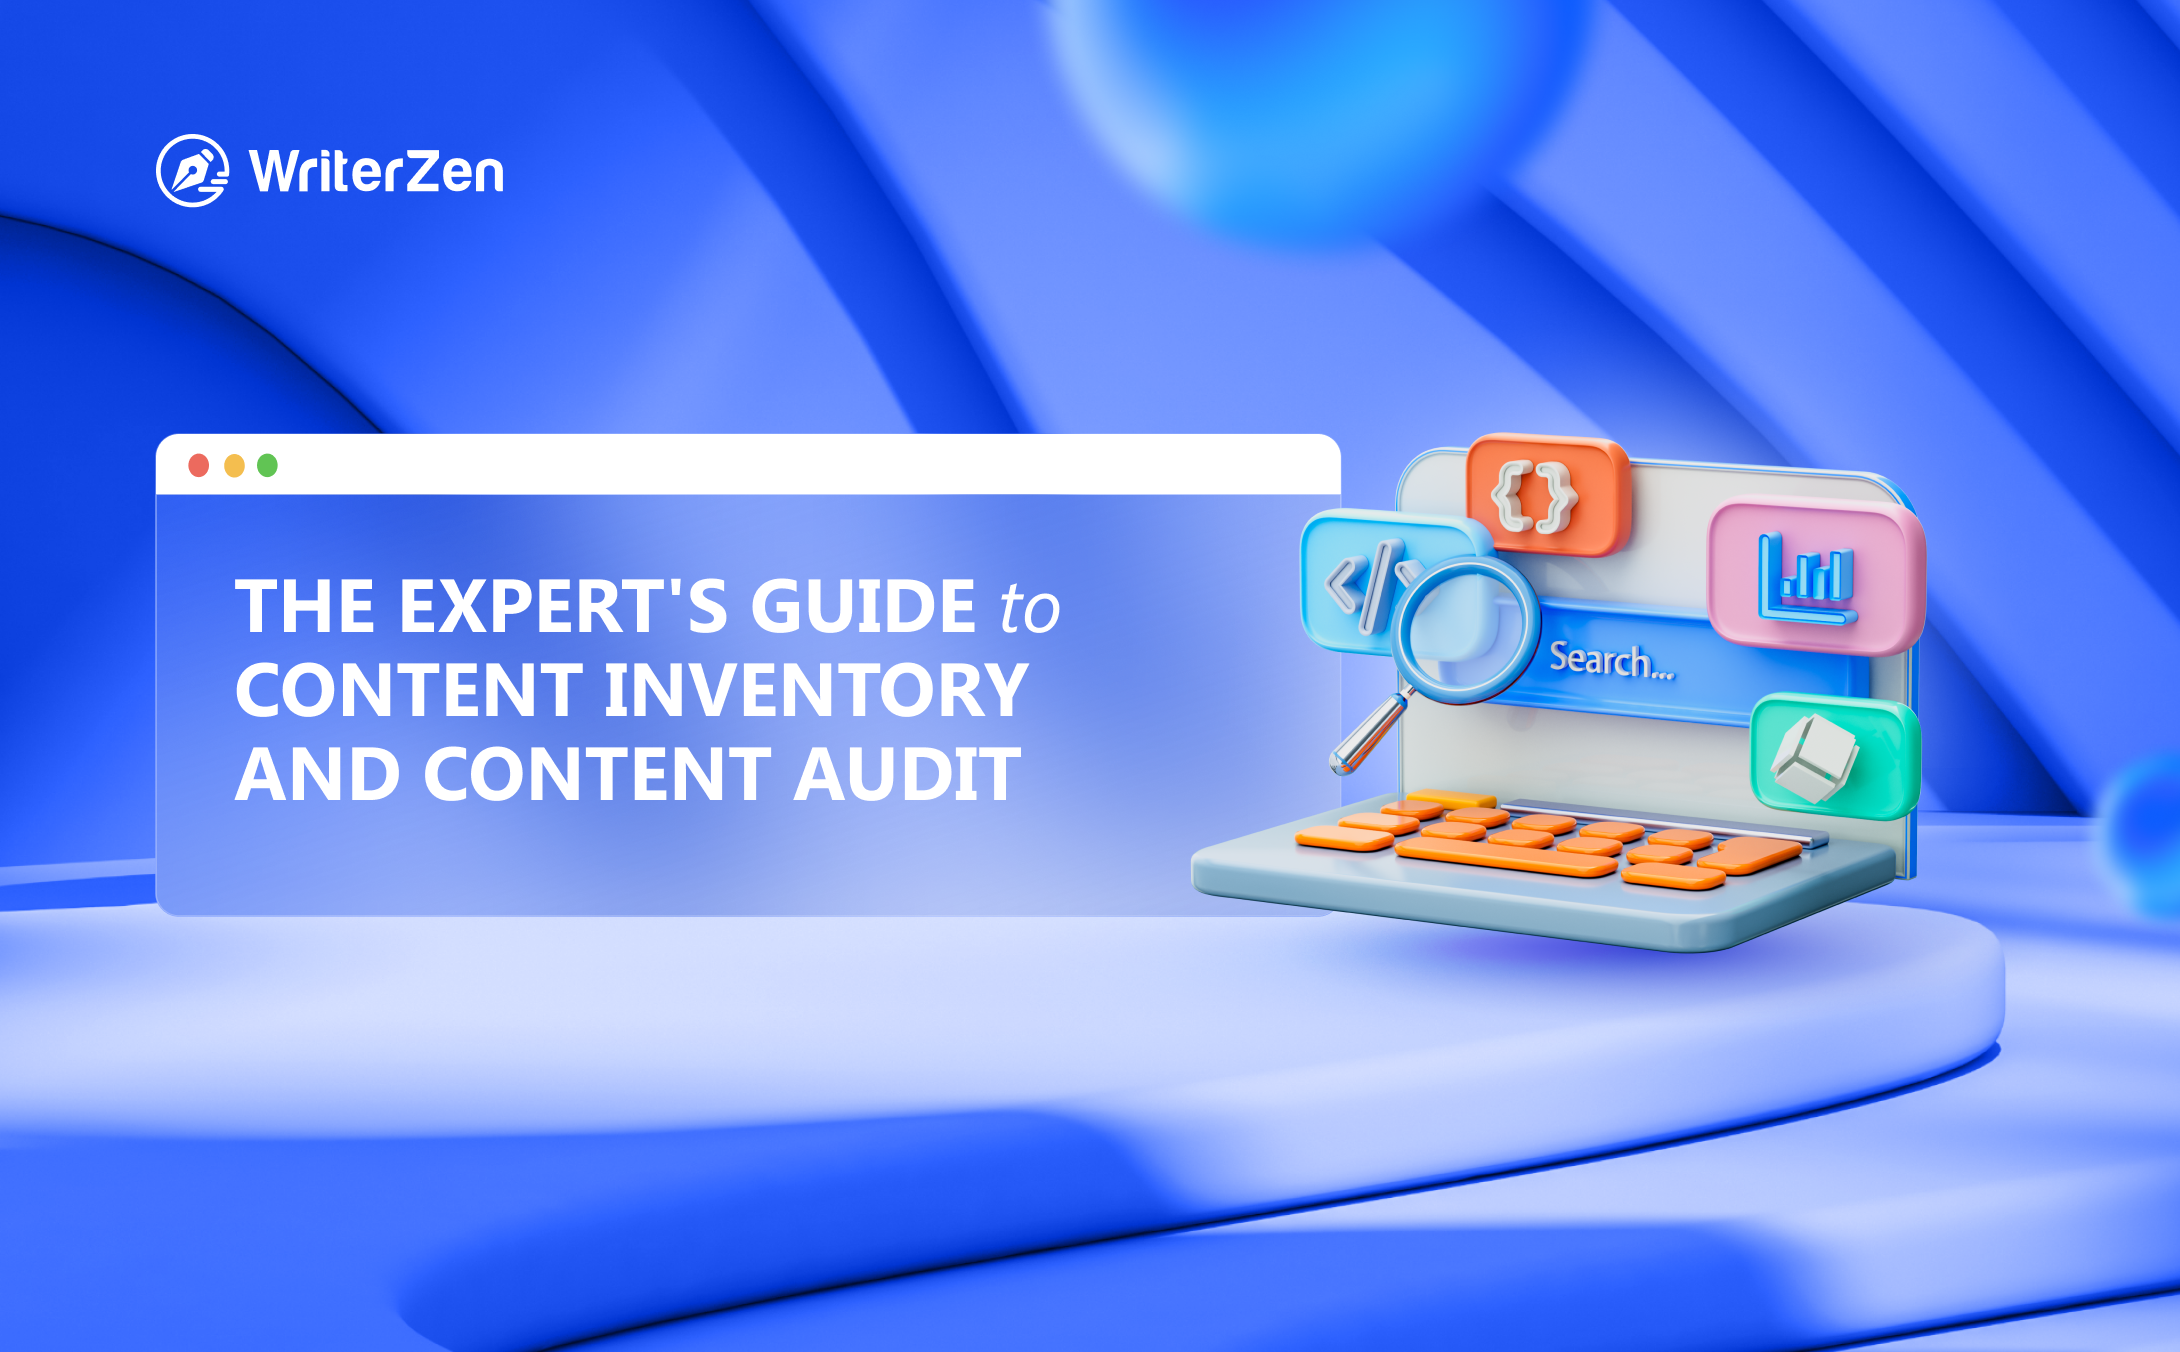 The Expert's Guide to Content Inventory and Content Audit